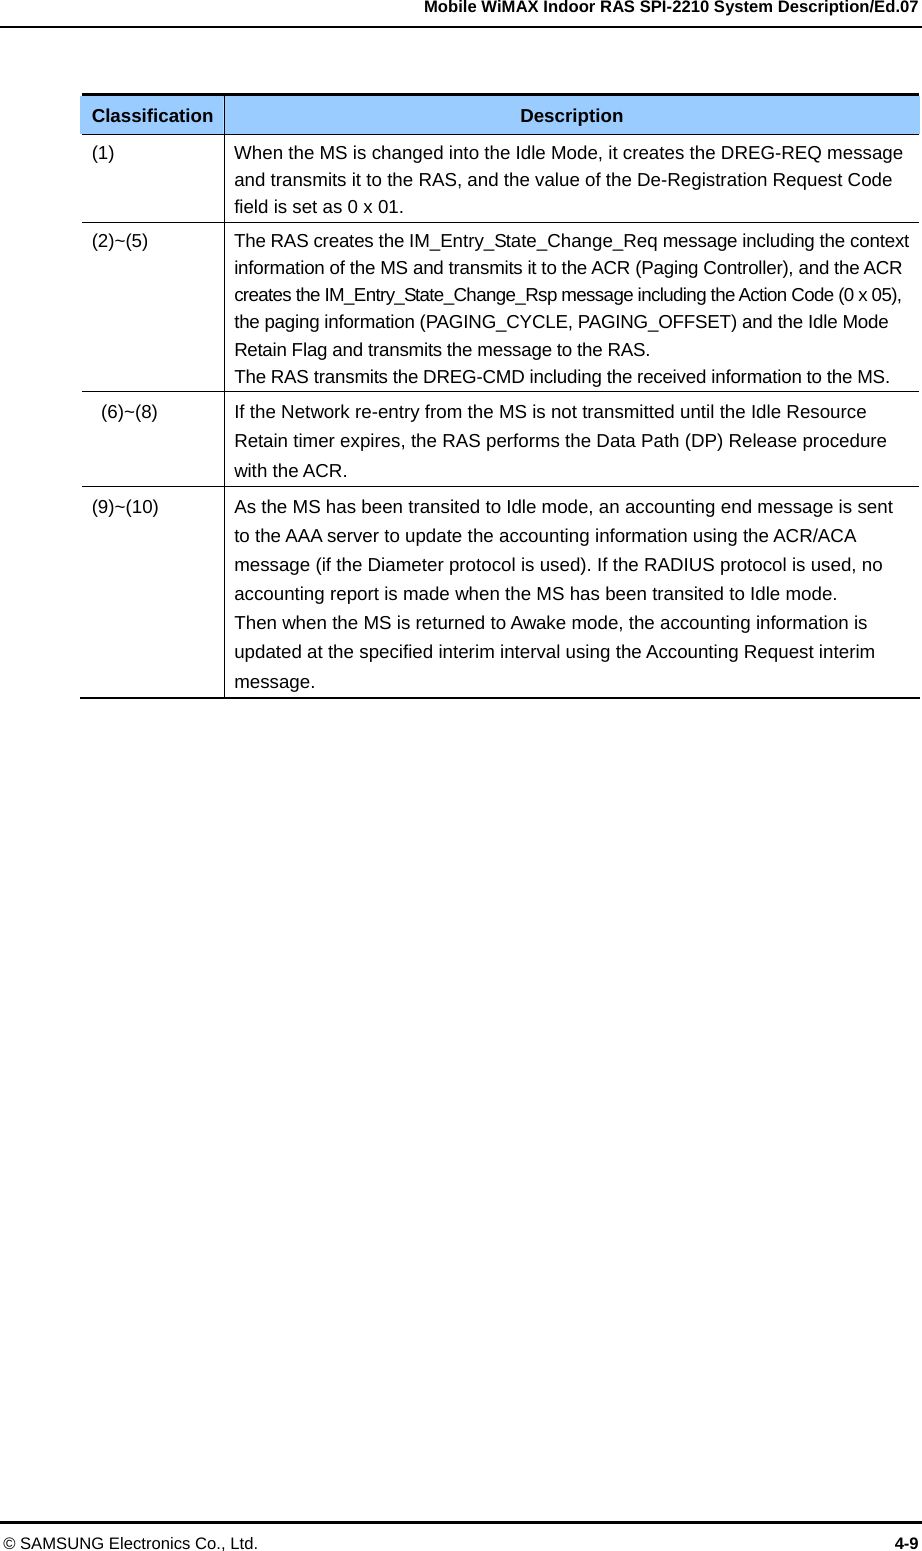   Mobile WiMAX Indoor RAS SPI-2210 System Description/Ed.07 © SAMSUNG Electronics Co., Ltd.  4-9  Classification  Description (1)  When the MS is changed into the Idle Mode, it creates the DREG-REQ message and transmits it to the RAS, and the value of the De-Registration Request Code field is set as 0 x 01. (2)~(5)  The RAS creates the IM_Entry_State_Change_Req message including the context information of the MS and transmits it to the ACR (Paging Controller), and the ACR creates the IM_Entry_State_Change_Rsp message including the Action Code (0 x 05), the paging information (PAGING_CYCLE, PAGING_OFFSET) and the Idle Mode Retain Flag and transmits the message to the RAS.   The RAS transmits the DREG-CMD including the received information to the MS.   (6)~(8)  If the Network re-entry from the MS is not transmitted until the Idle Resource Retain timer expires, the RAS performs the Data Path (DP) Release procedure with the ACR. (9)~(10)  As the MS has been transited to Idle mode, an accounting end message is sent to the AAA server to update the accounting information using the ACR/ACA message (if the Diameter protocol is used). If the RADIUS protocol is used, no accounting report is made when the MS has been transited to Idle mode.   Then when the MS is returned to Awake mode, the accounting information is updated at the specified interim interval using the Accounting Request interim message.  